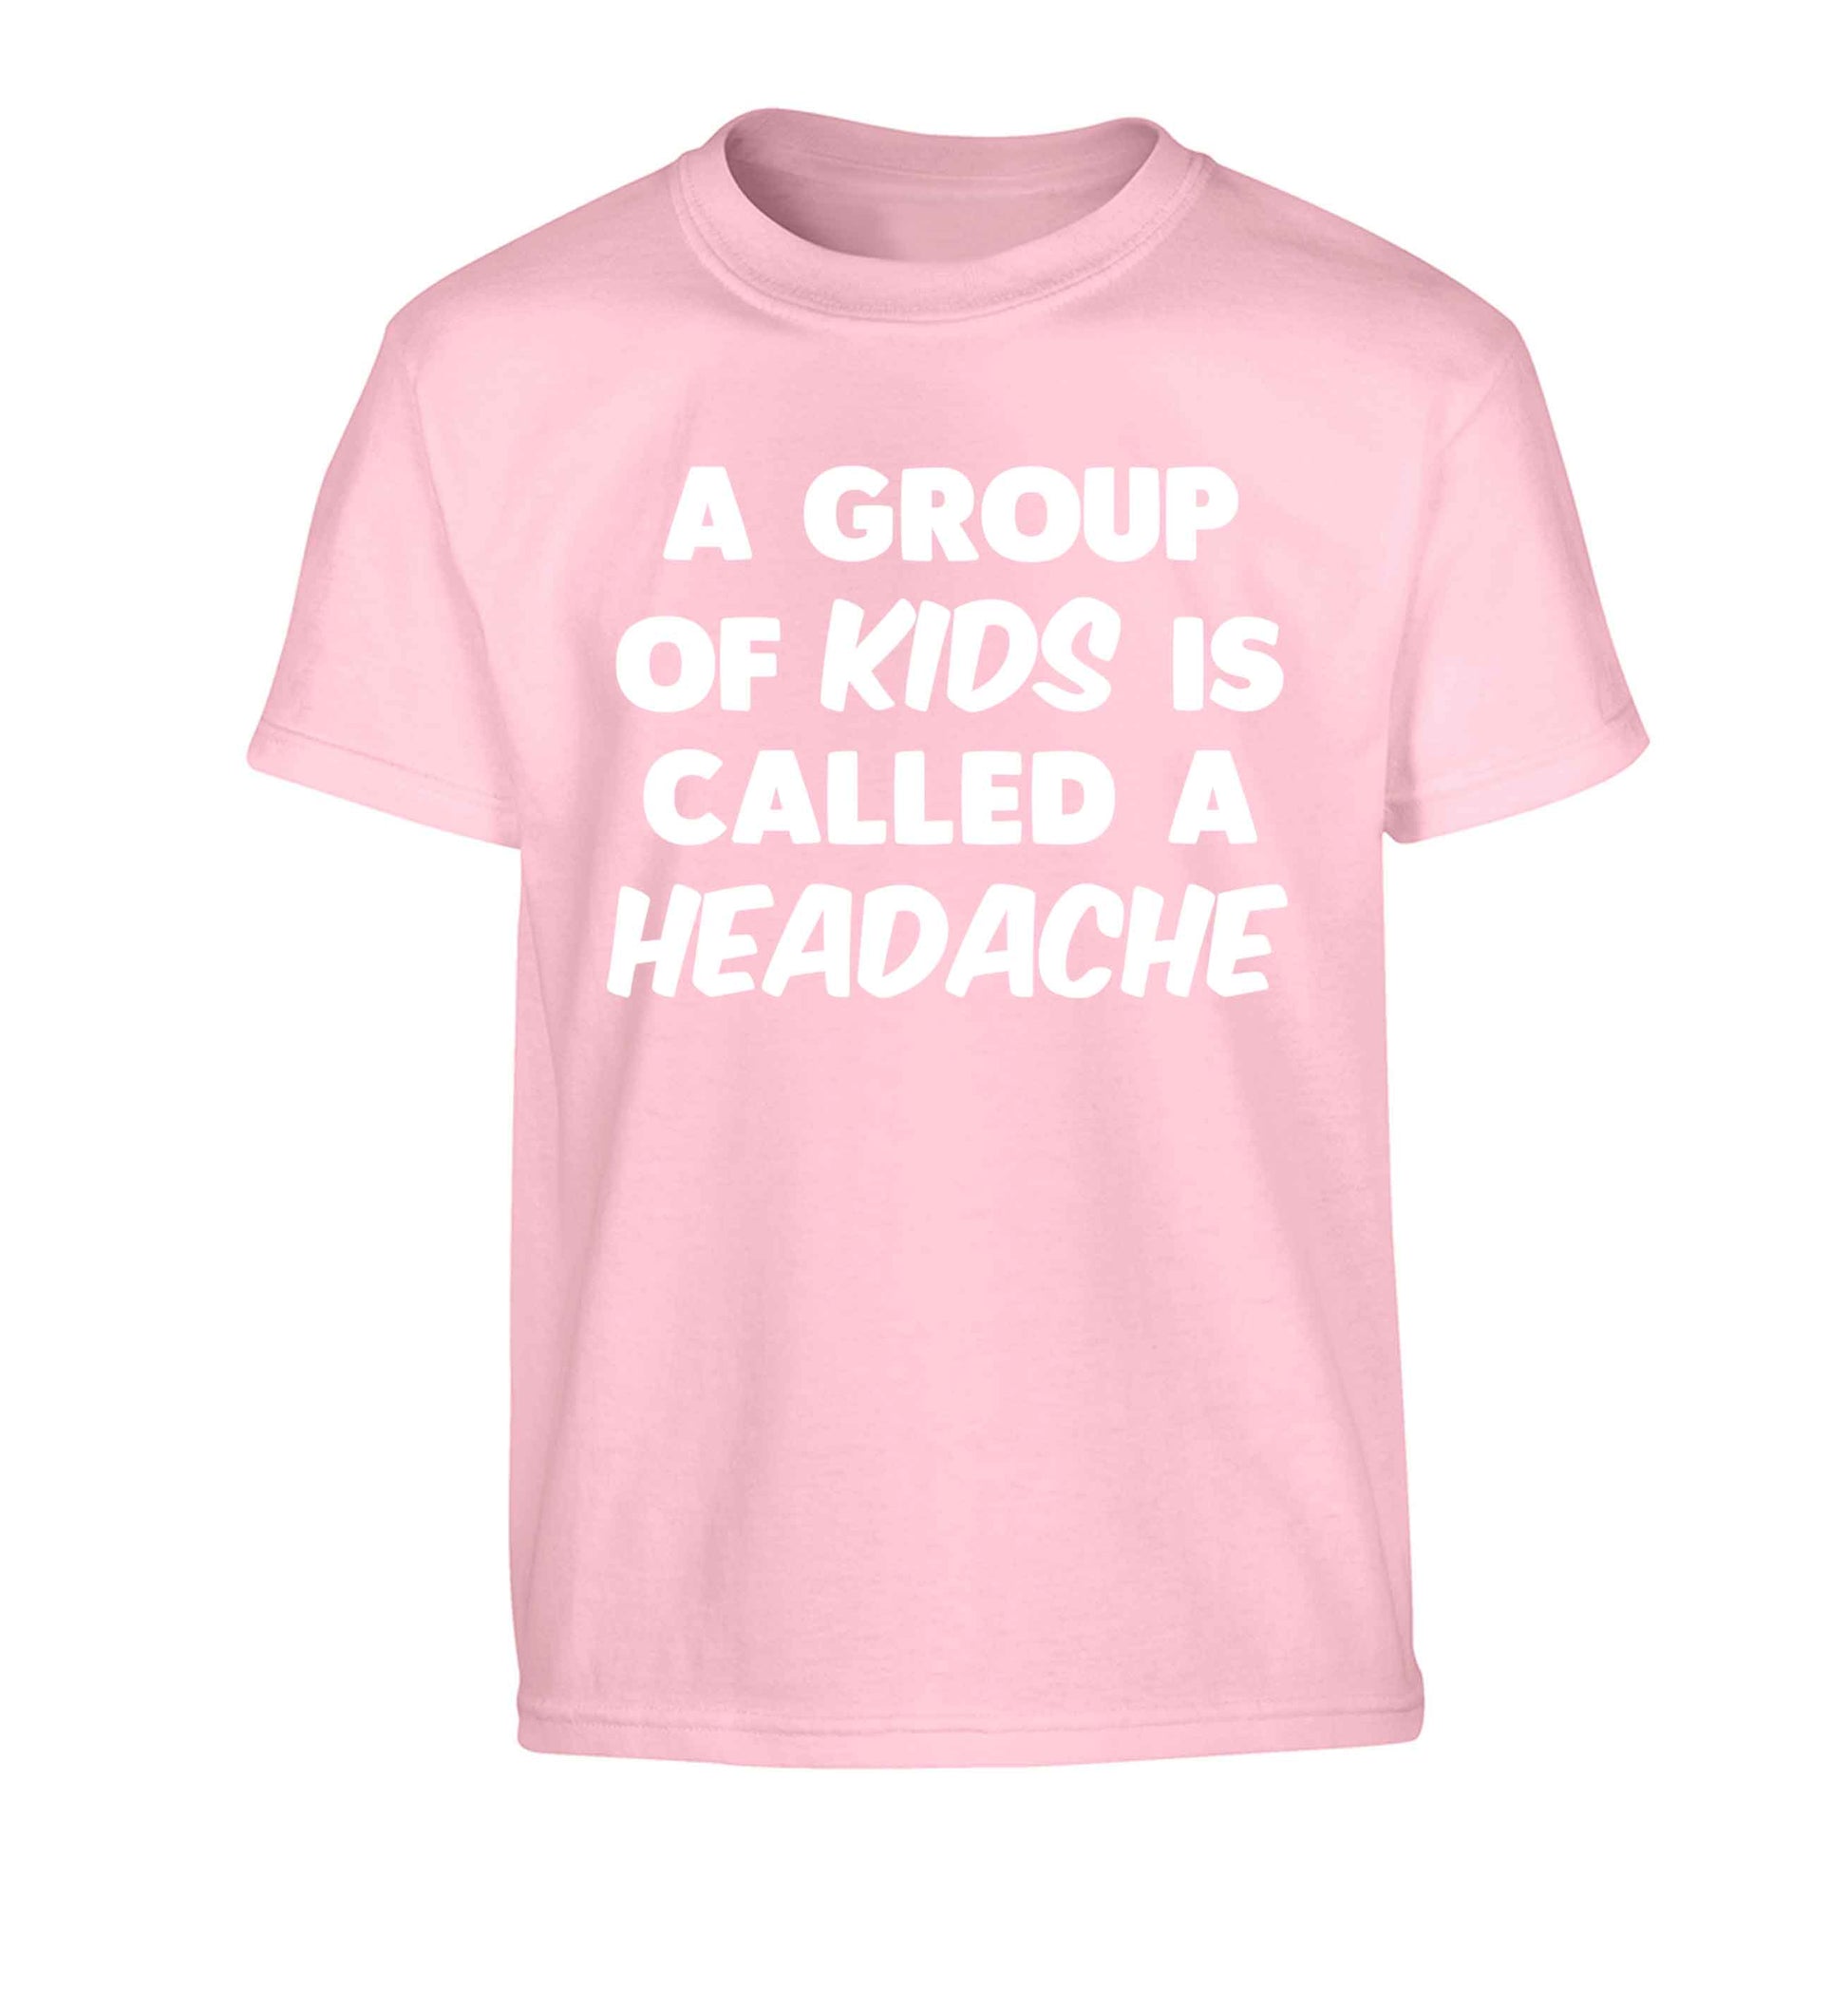 A group of kids is called a headache Children's light pink Tshirt 12-13 Years